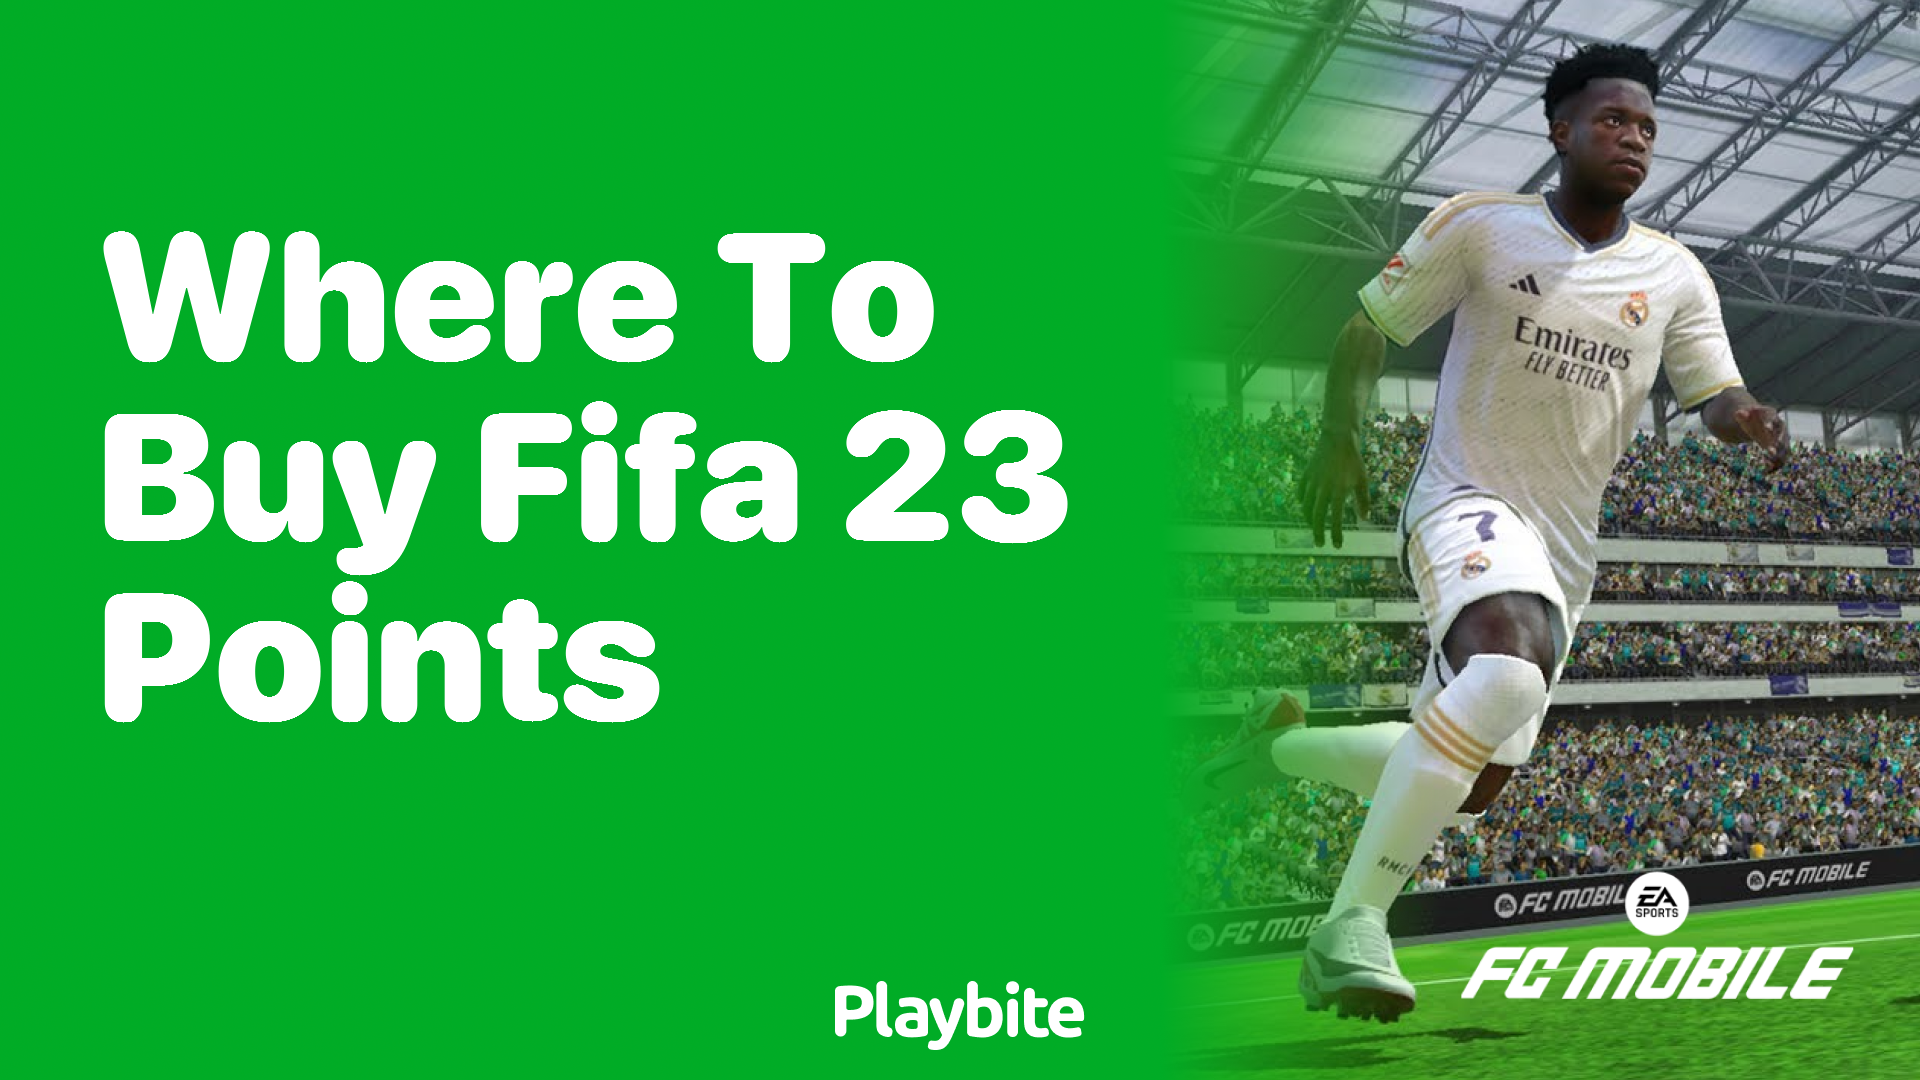 Where Can You Buy FIFA 23 Points?